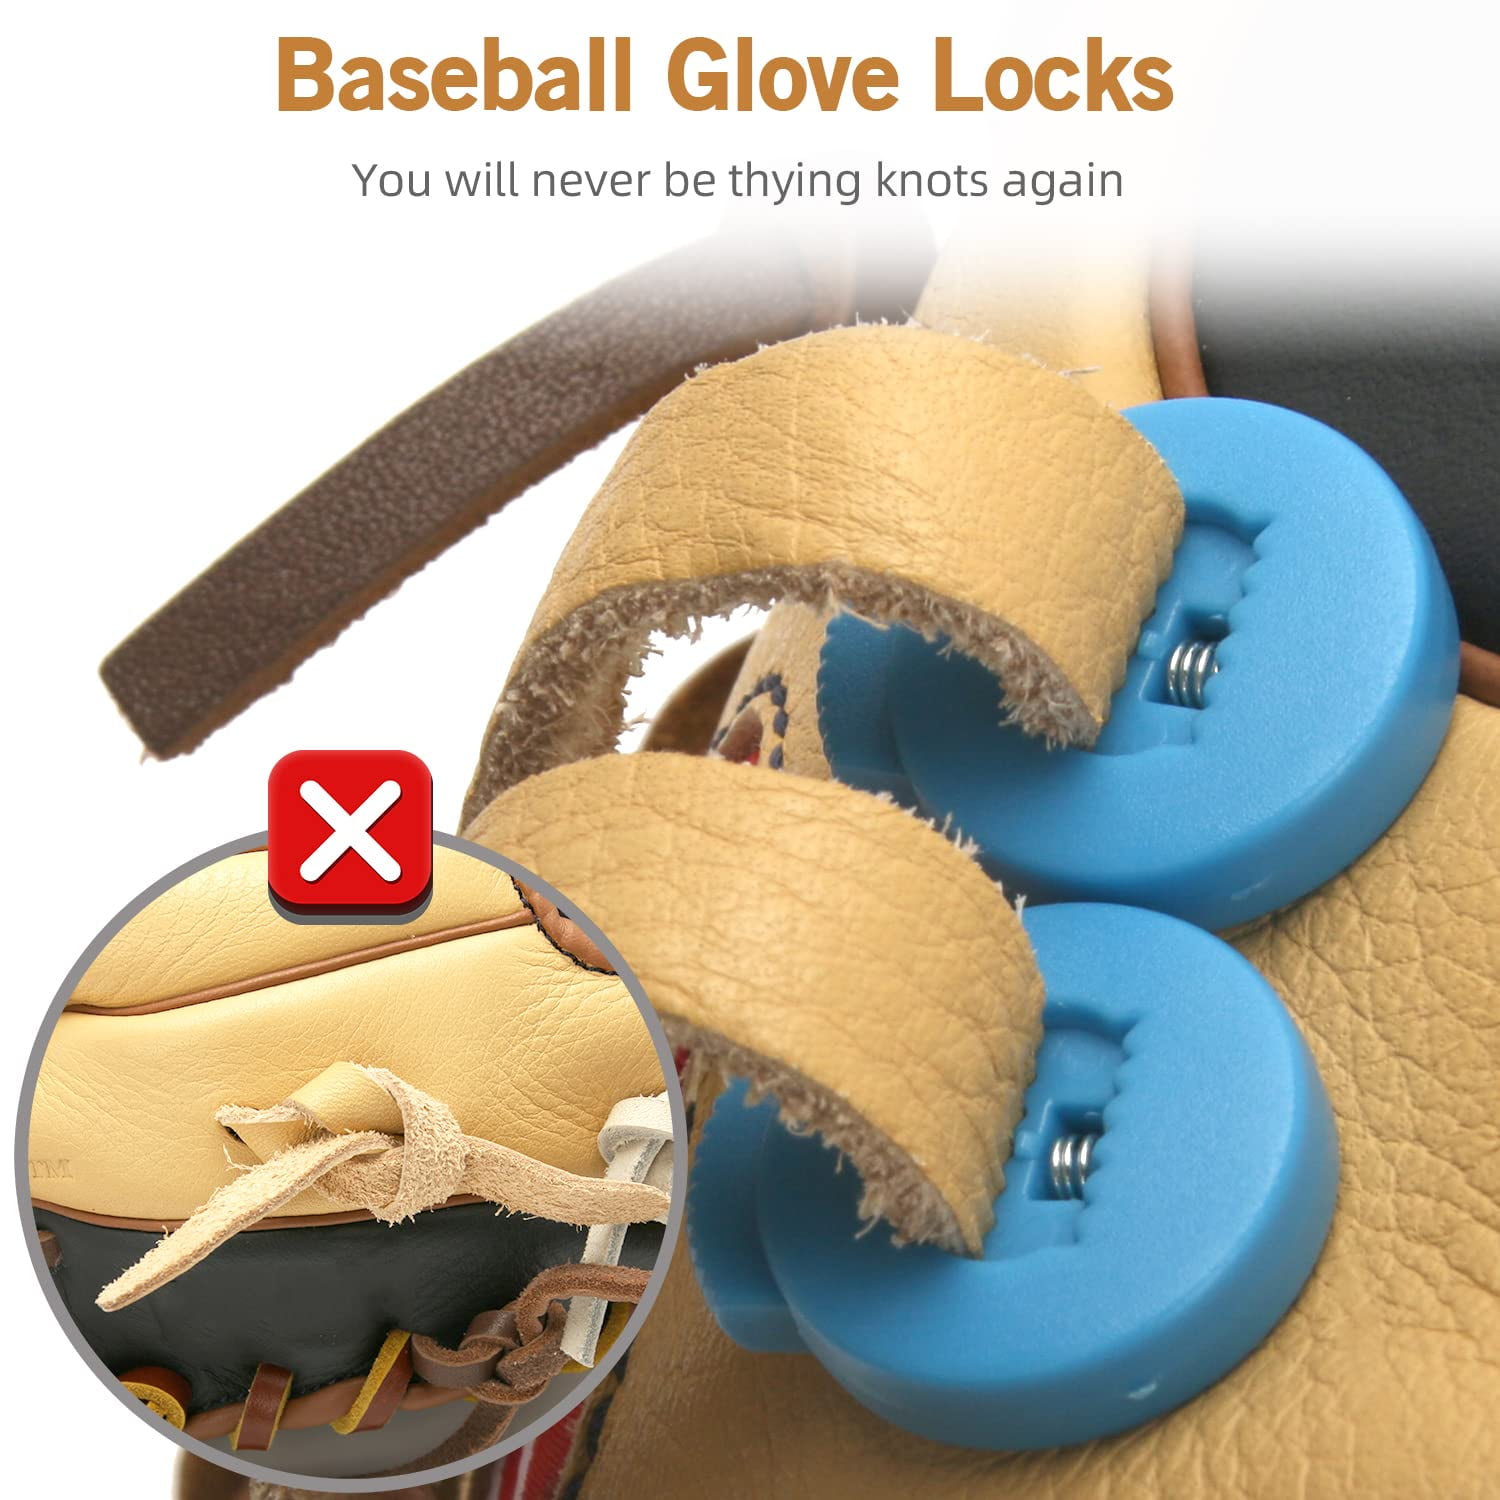  AliBall Glove Locks, Lace Locks for Baseball Glove 8 Pack,  Never Need Thying Knots Again, Strong Elasticity, Made Plastic and Springs,  Fits All Gloves, Baseball Glove Accessories : Sports & Outdoors